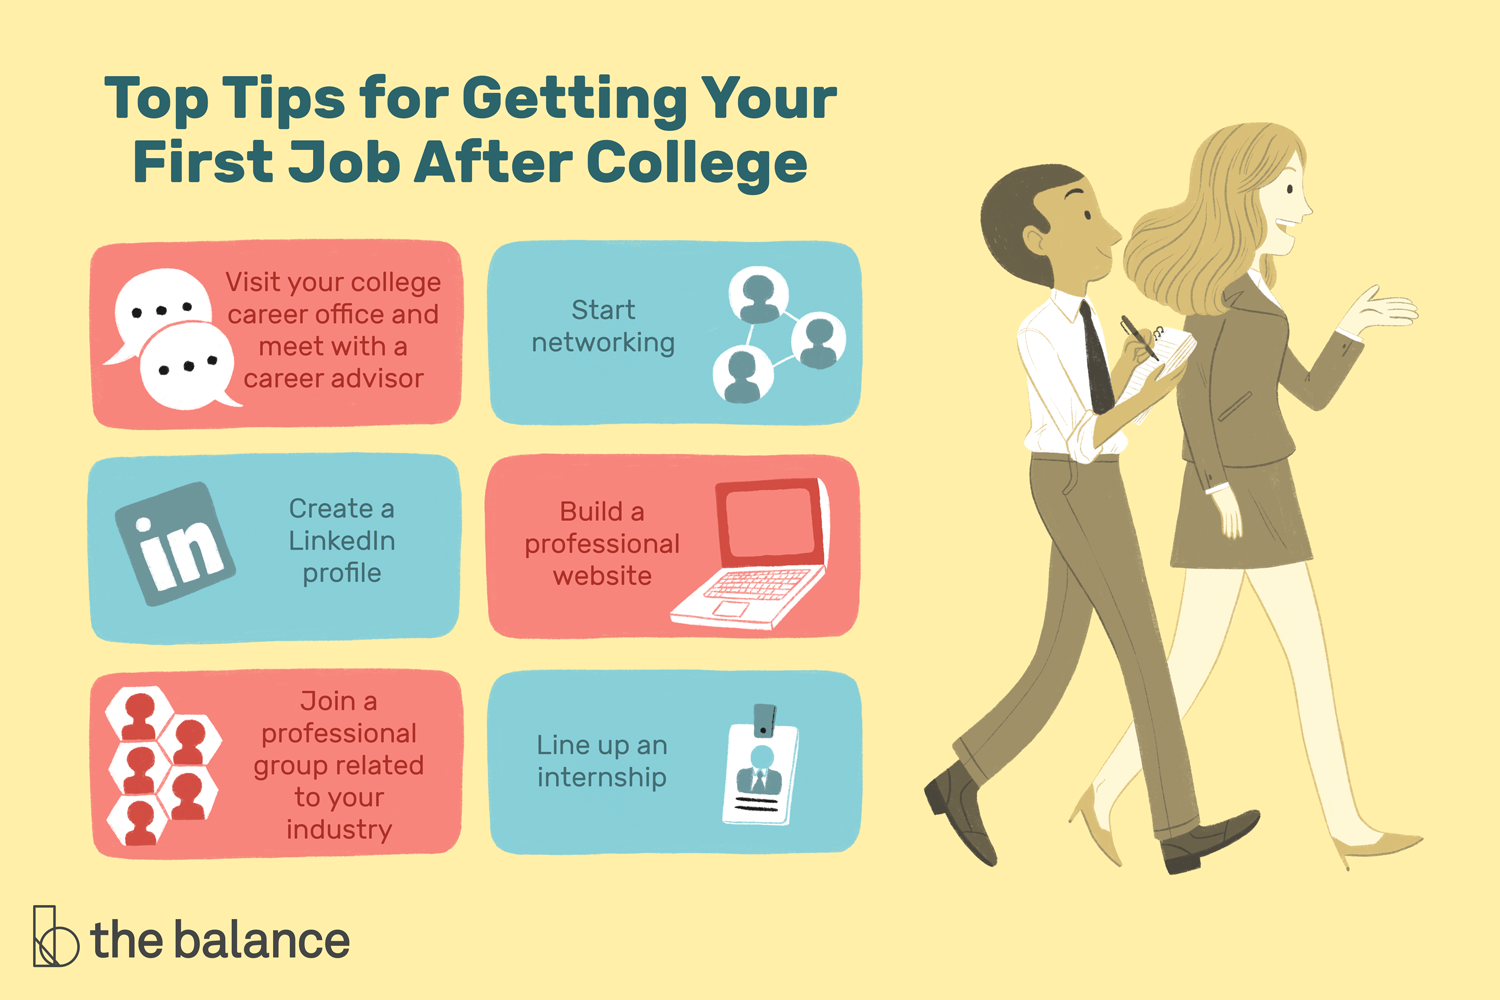 How to get a good job after college?